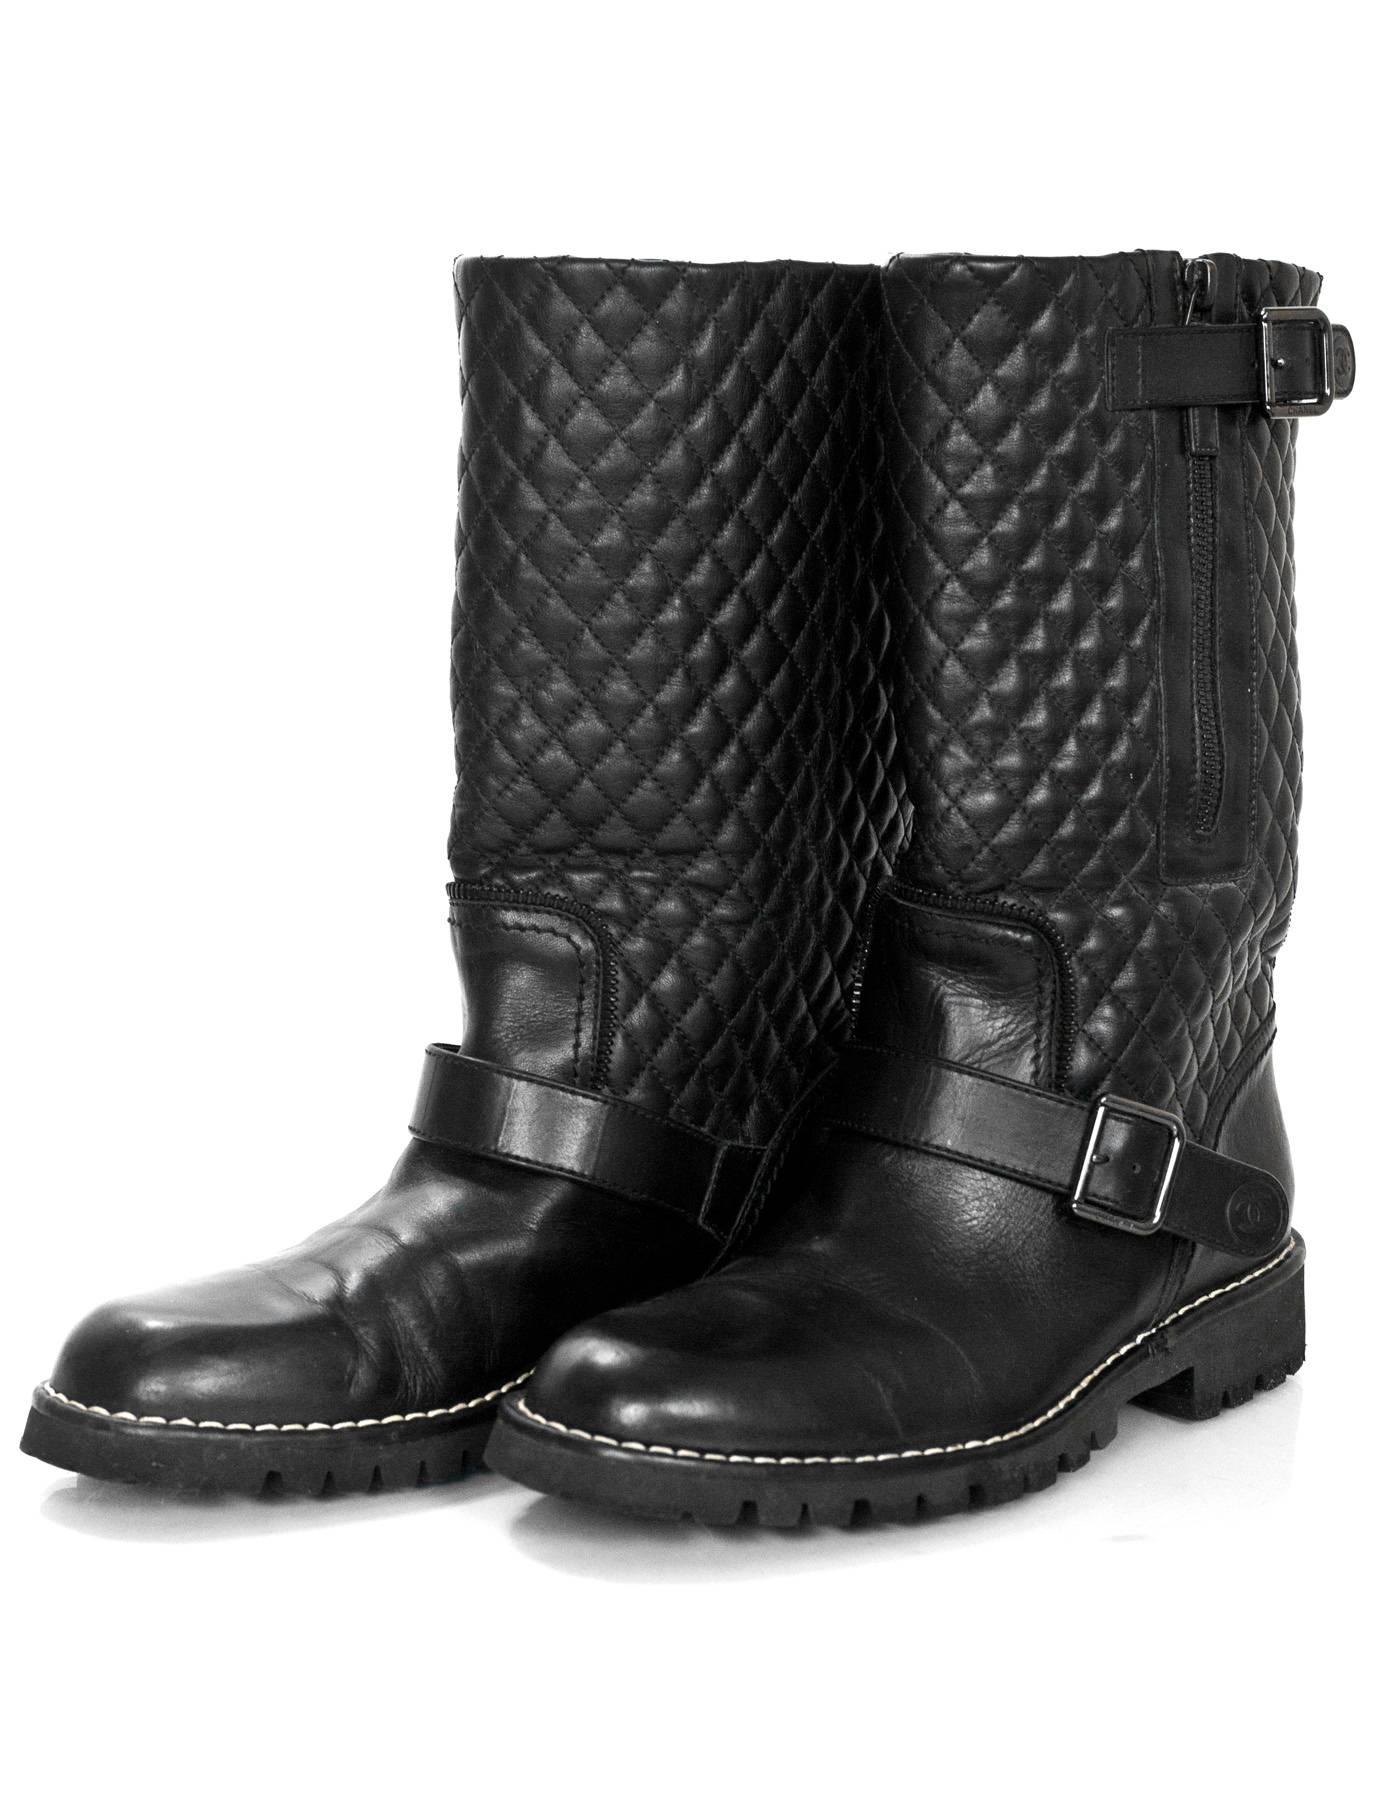 Chanel Black Quilted Leather Biker Boots Sz 40

Made In: Italy
Color: Black
Materials: Leather
Closure/Opening: Side zip closure
Sole Stamp: CC Chanel Made in Italy
Overall Condition: Excellent pre-owned condition with the exception of some creasing